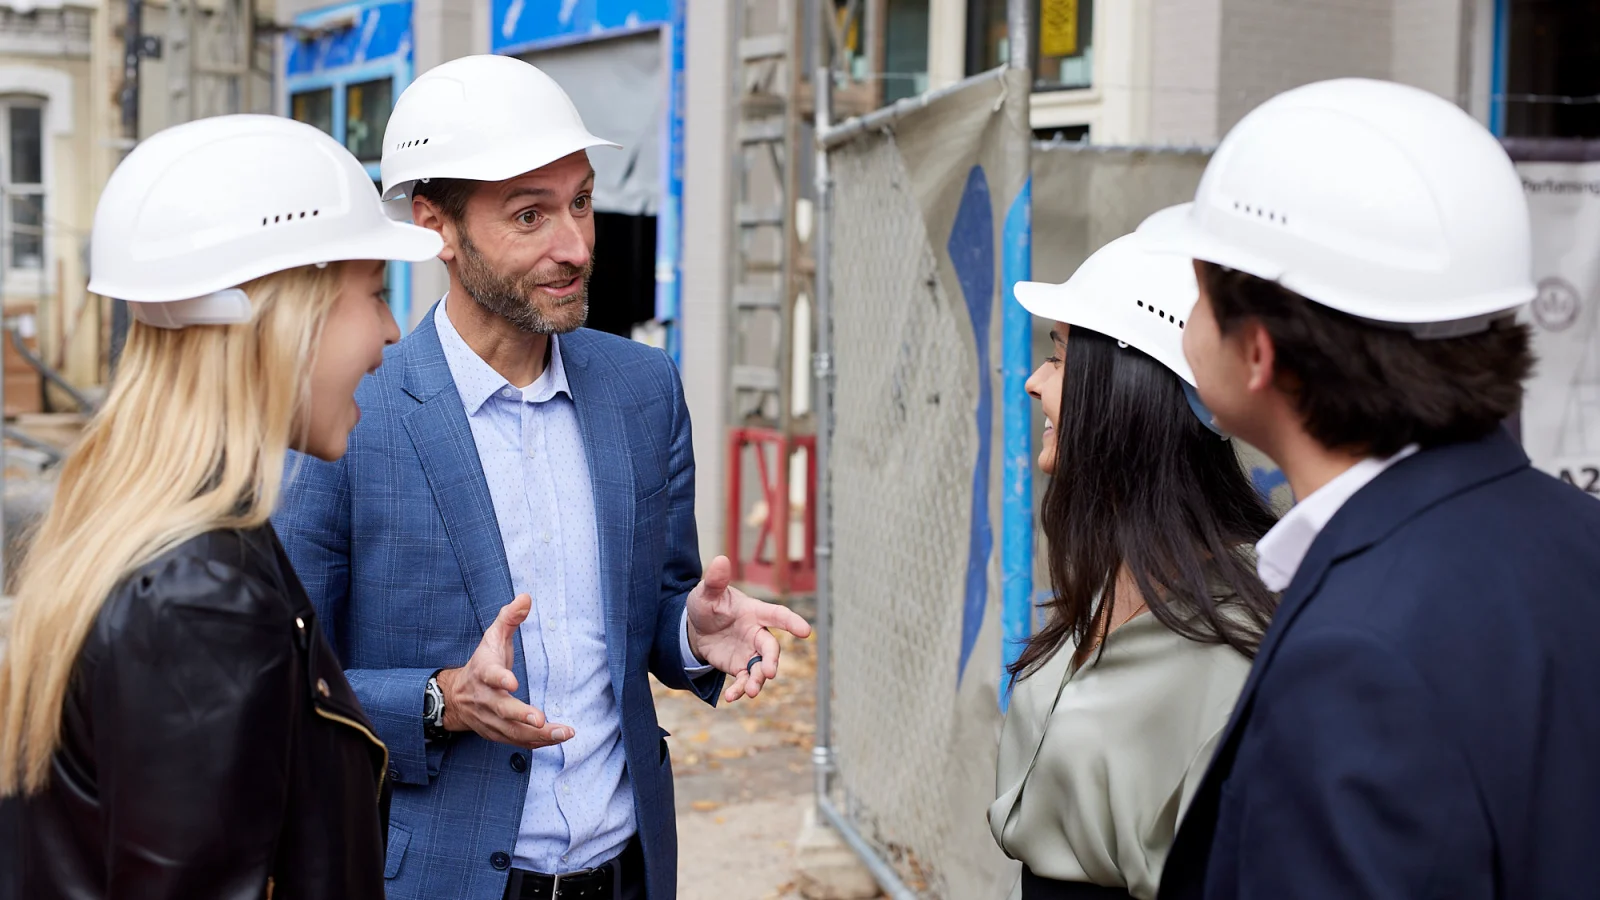 Two men and two women stand in a circle talking. They are dressed in formal business wear and all are wearing white hard hats. Behind them is a construction zone.